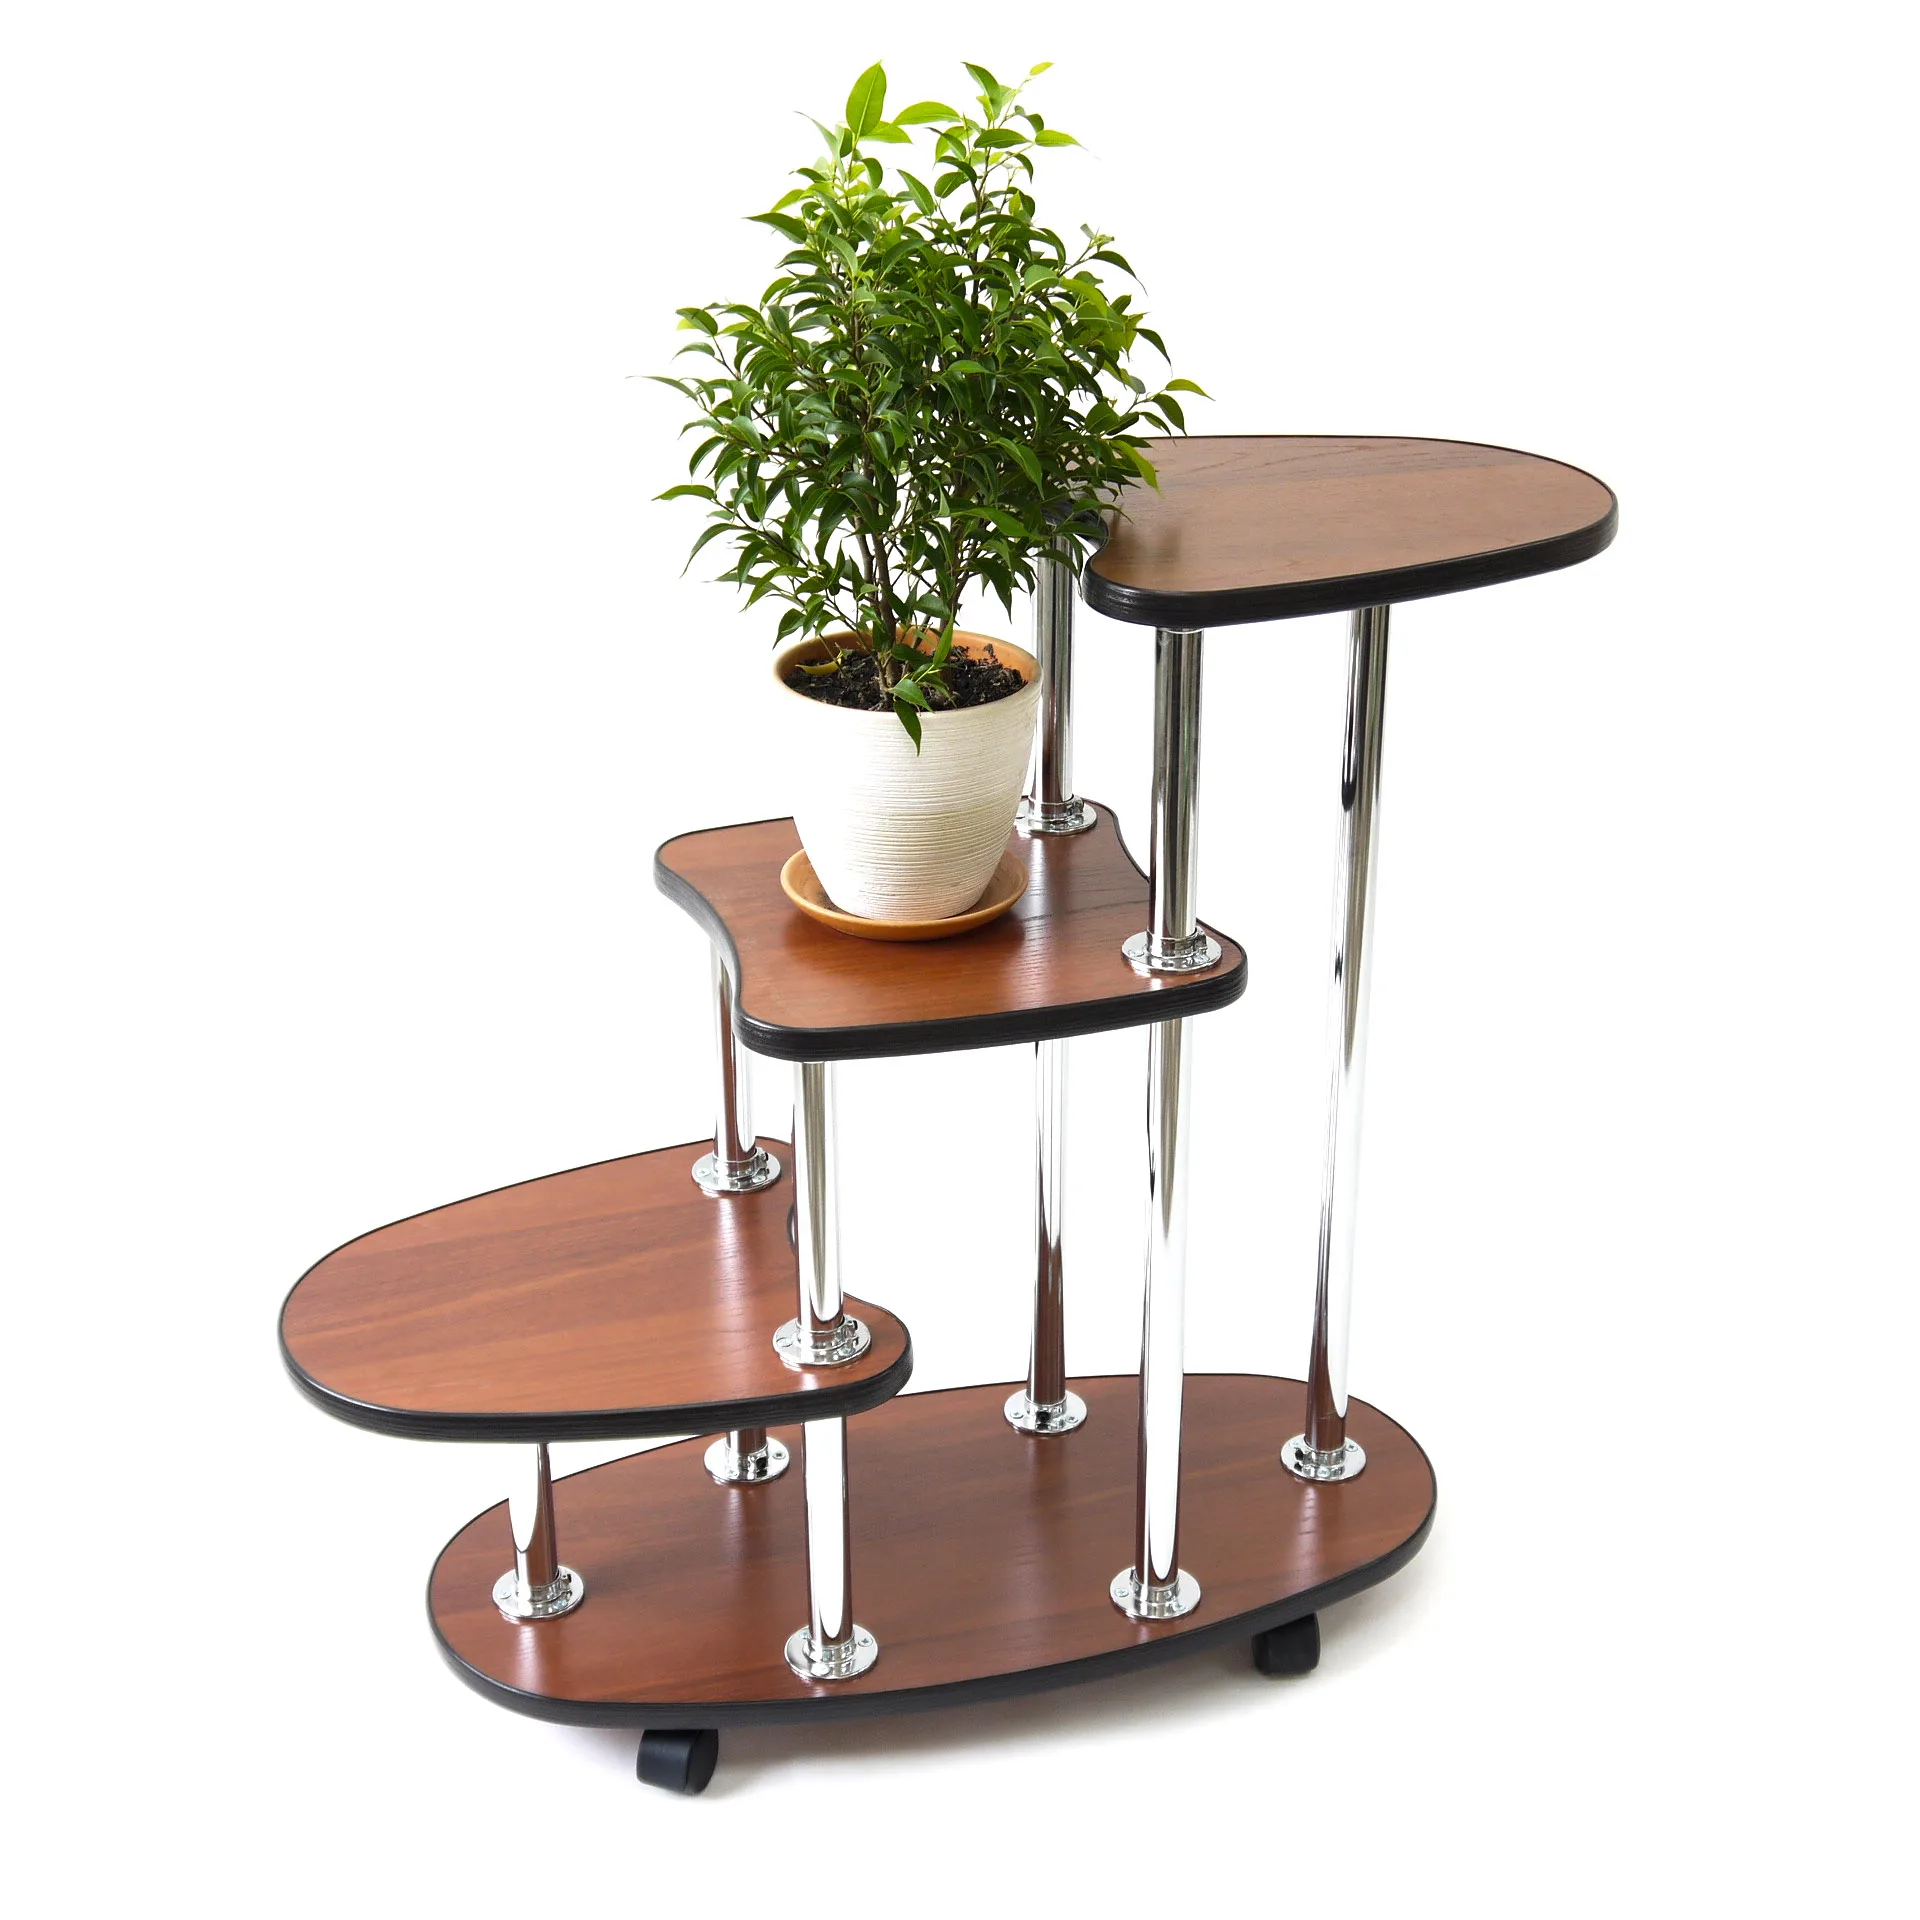 Фифа multi-level stand for flowers, plants, sculptures. - AliExpress